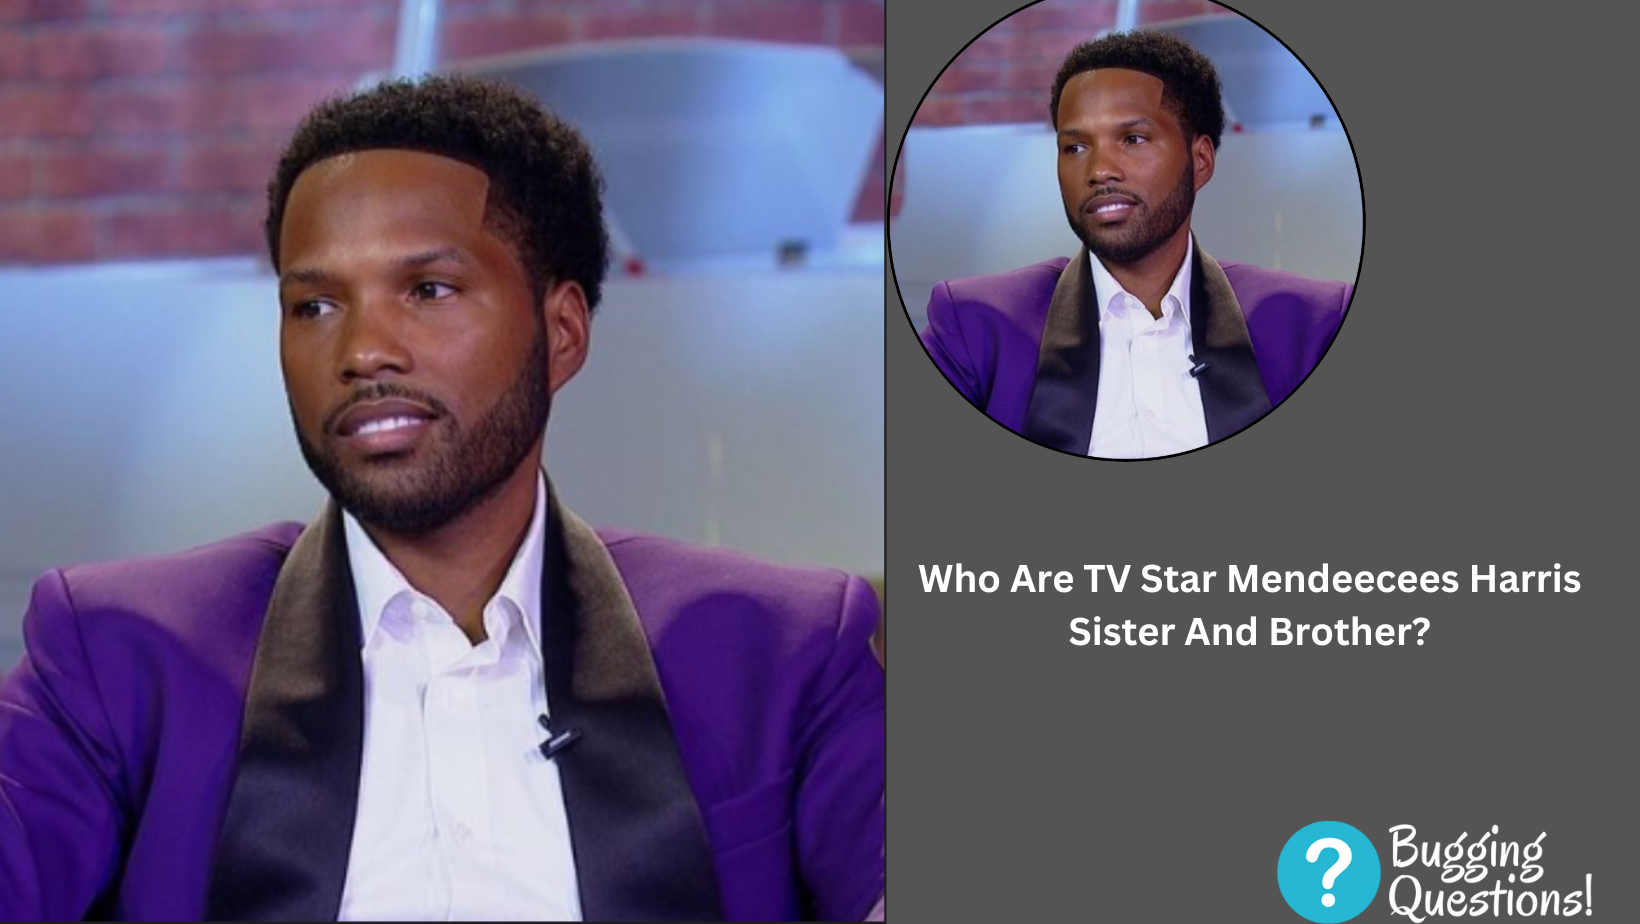 Who Are TV Star Mendeecees Harris Sister And Brother?